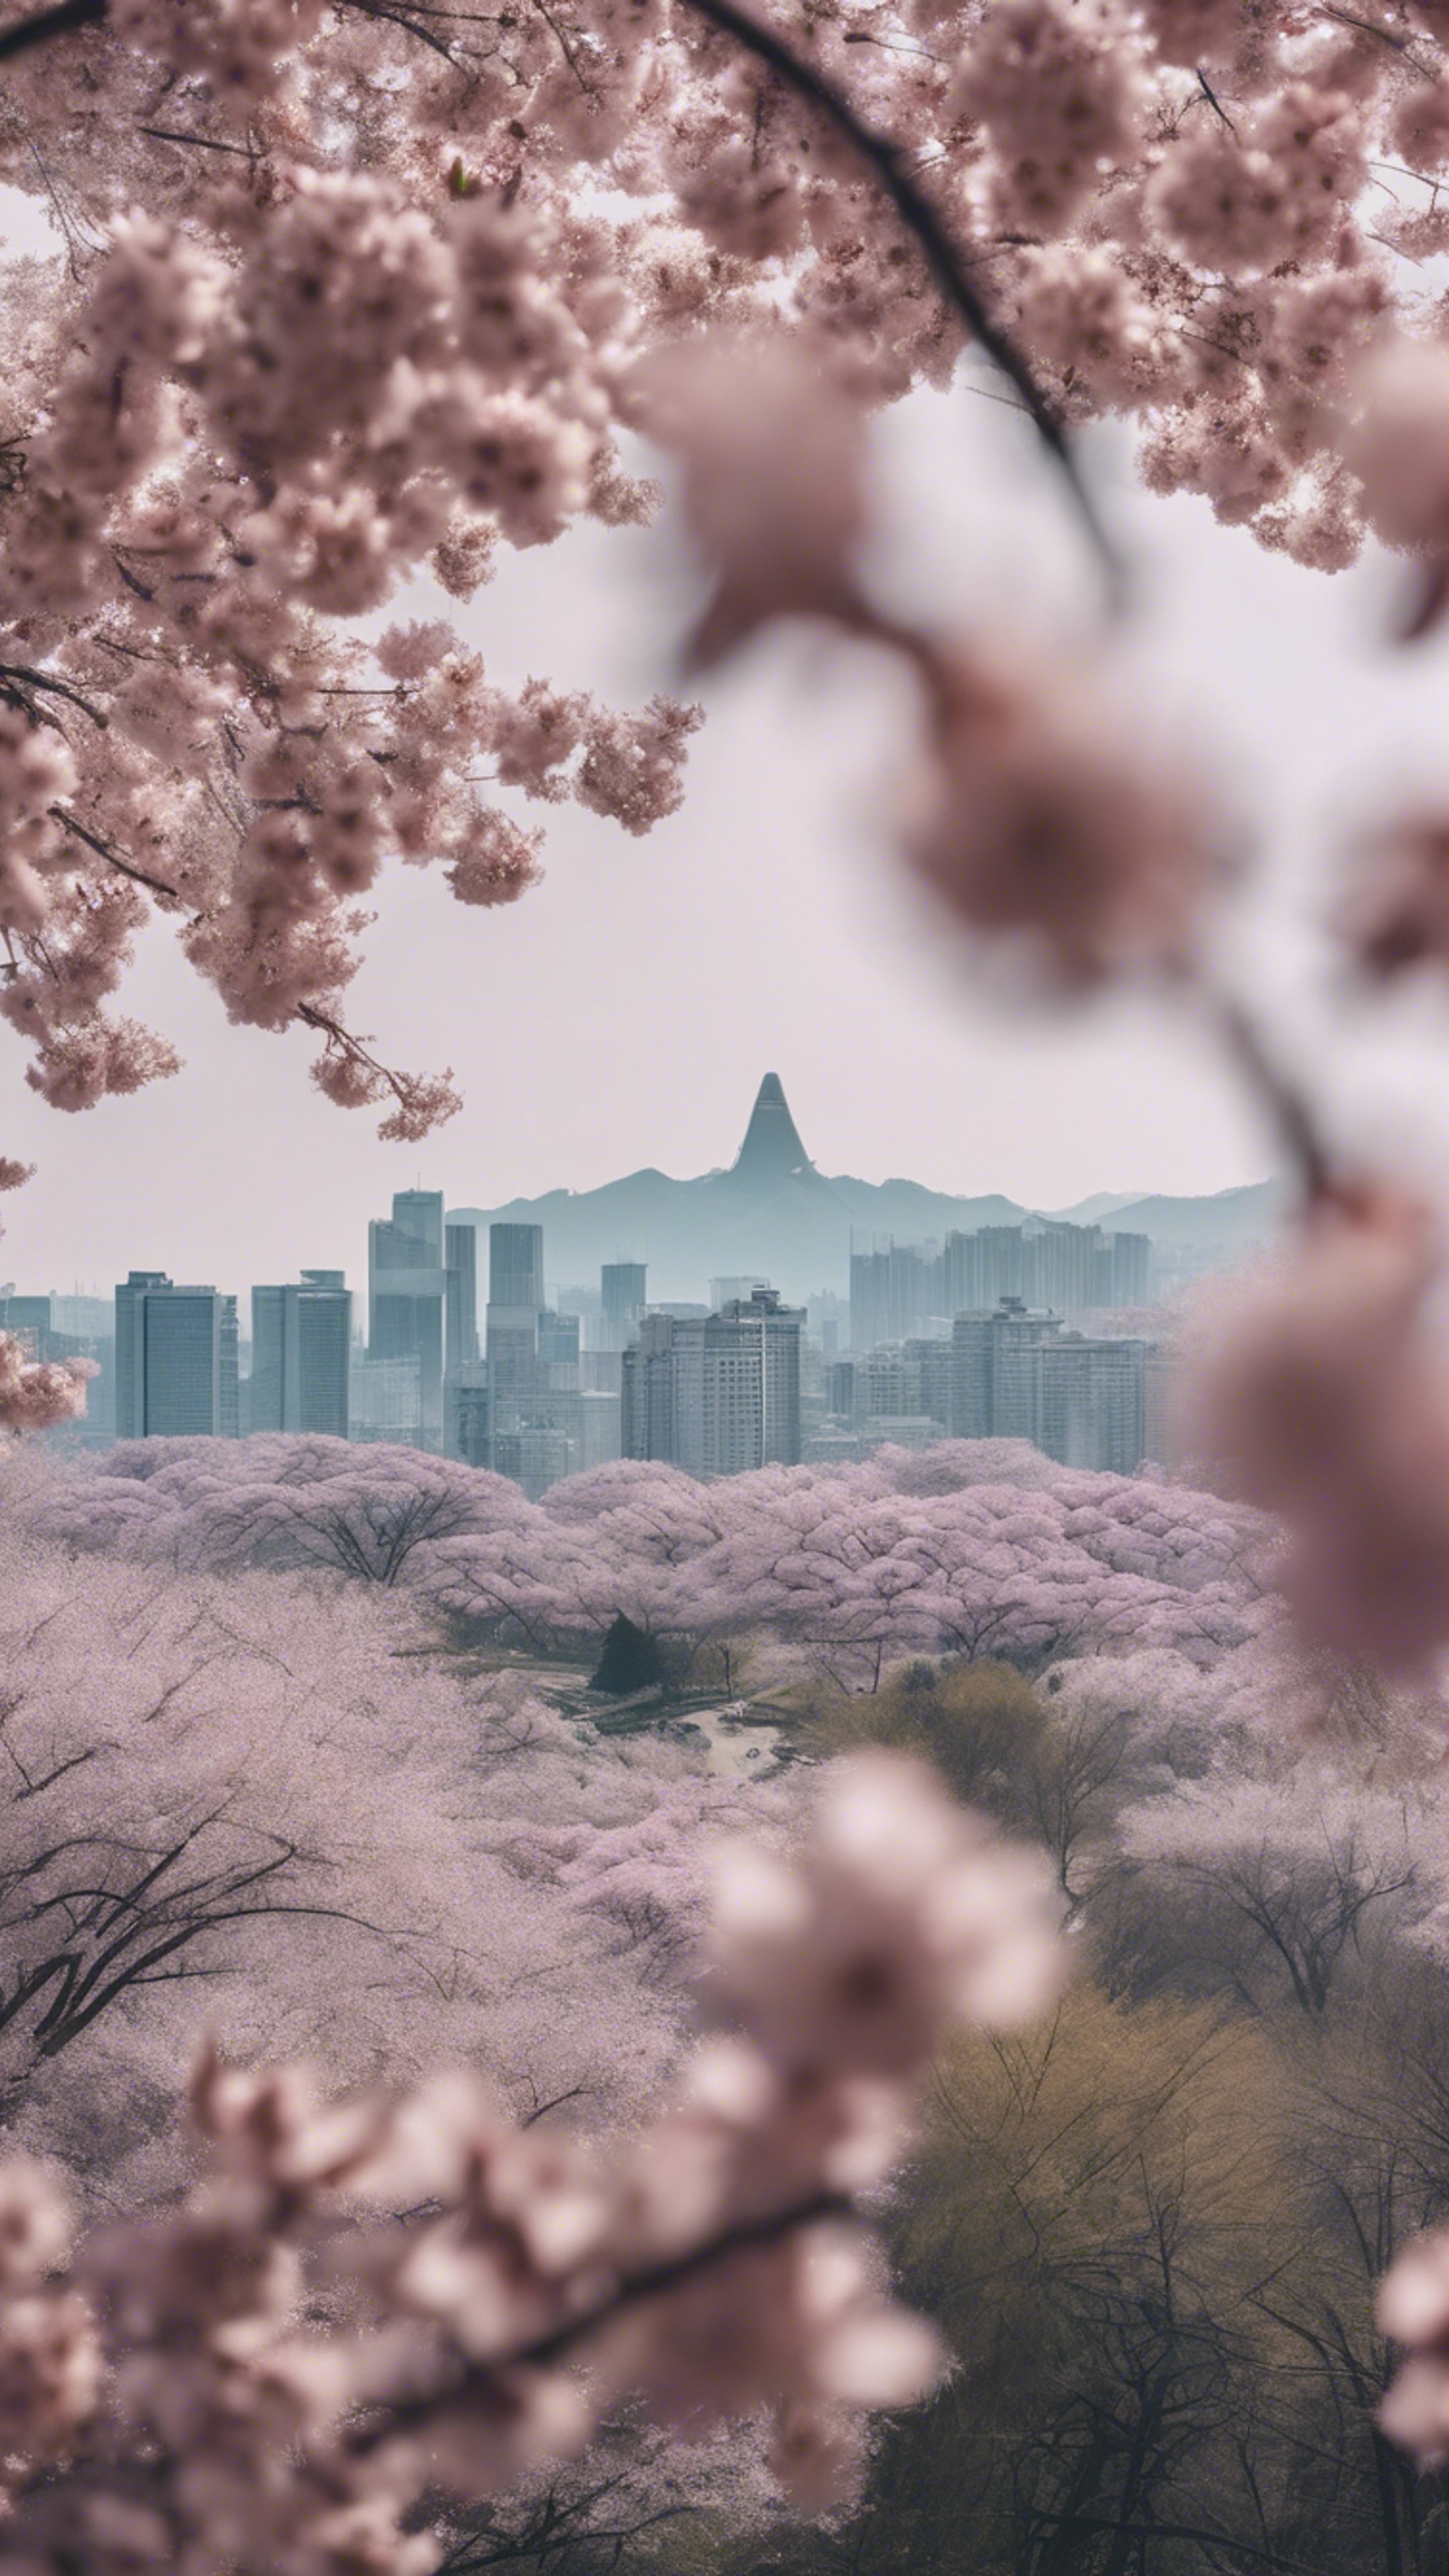 The Beijing skyline during cherry blossom season, the modern city framed by delicate blooms. Ταπετσαρία[197db06738df4d0f8259]